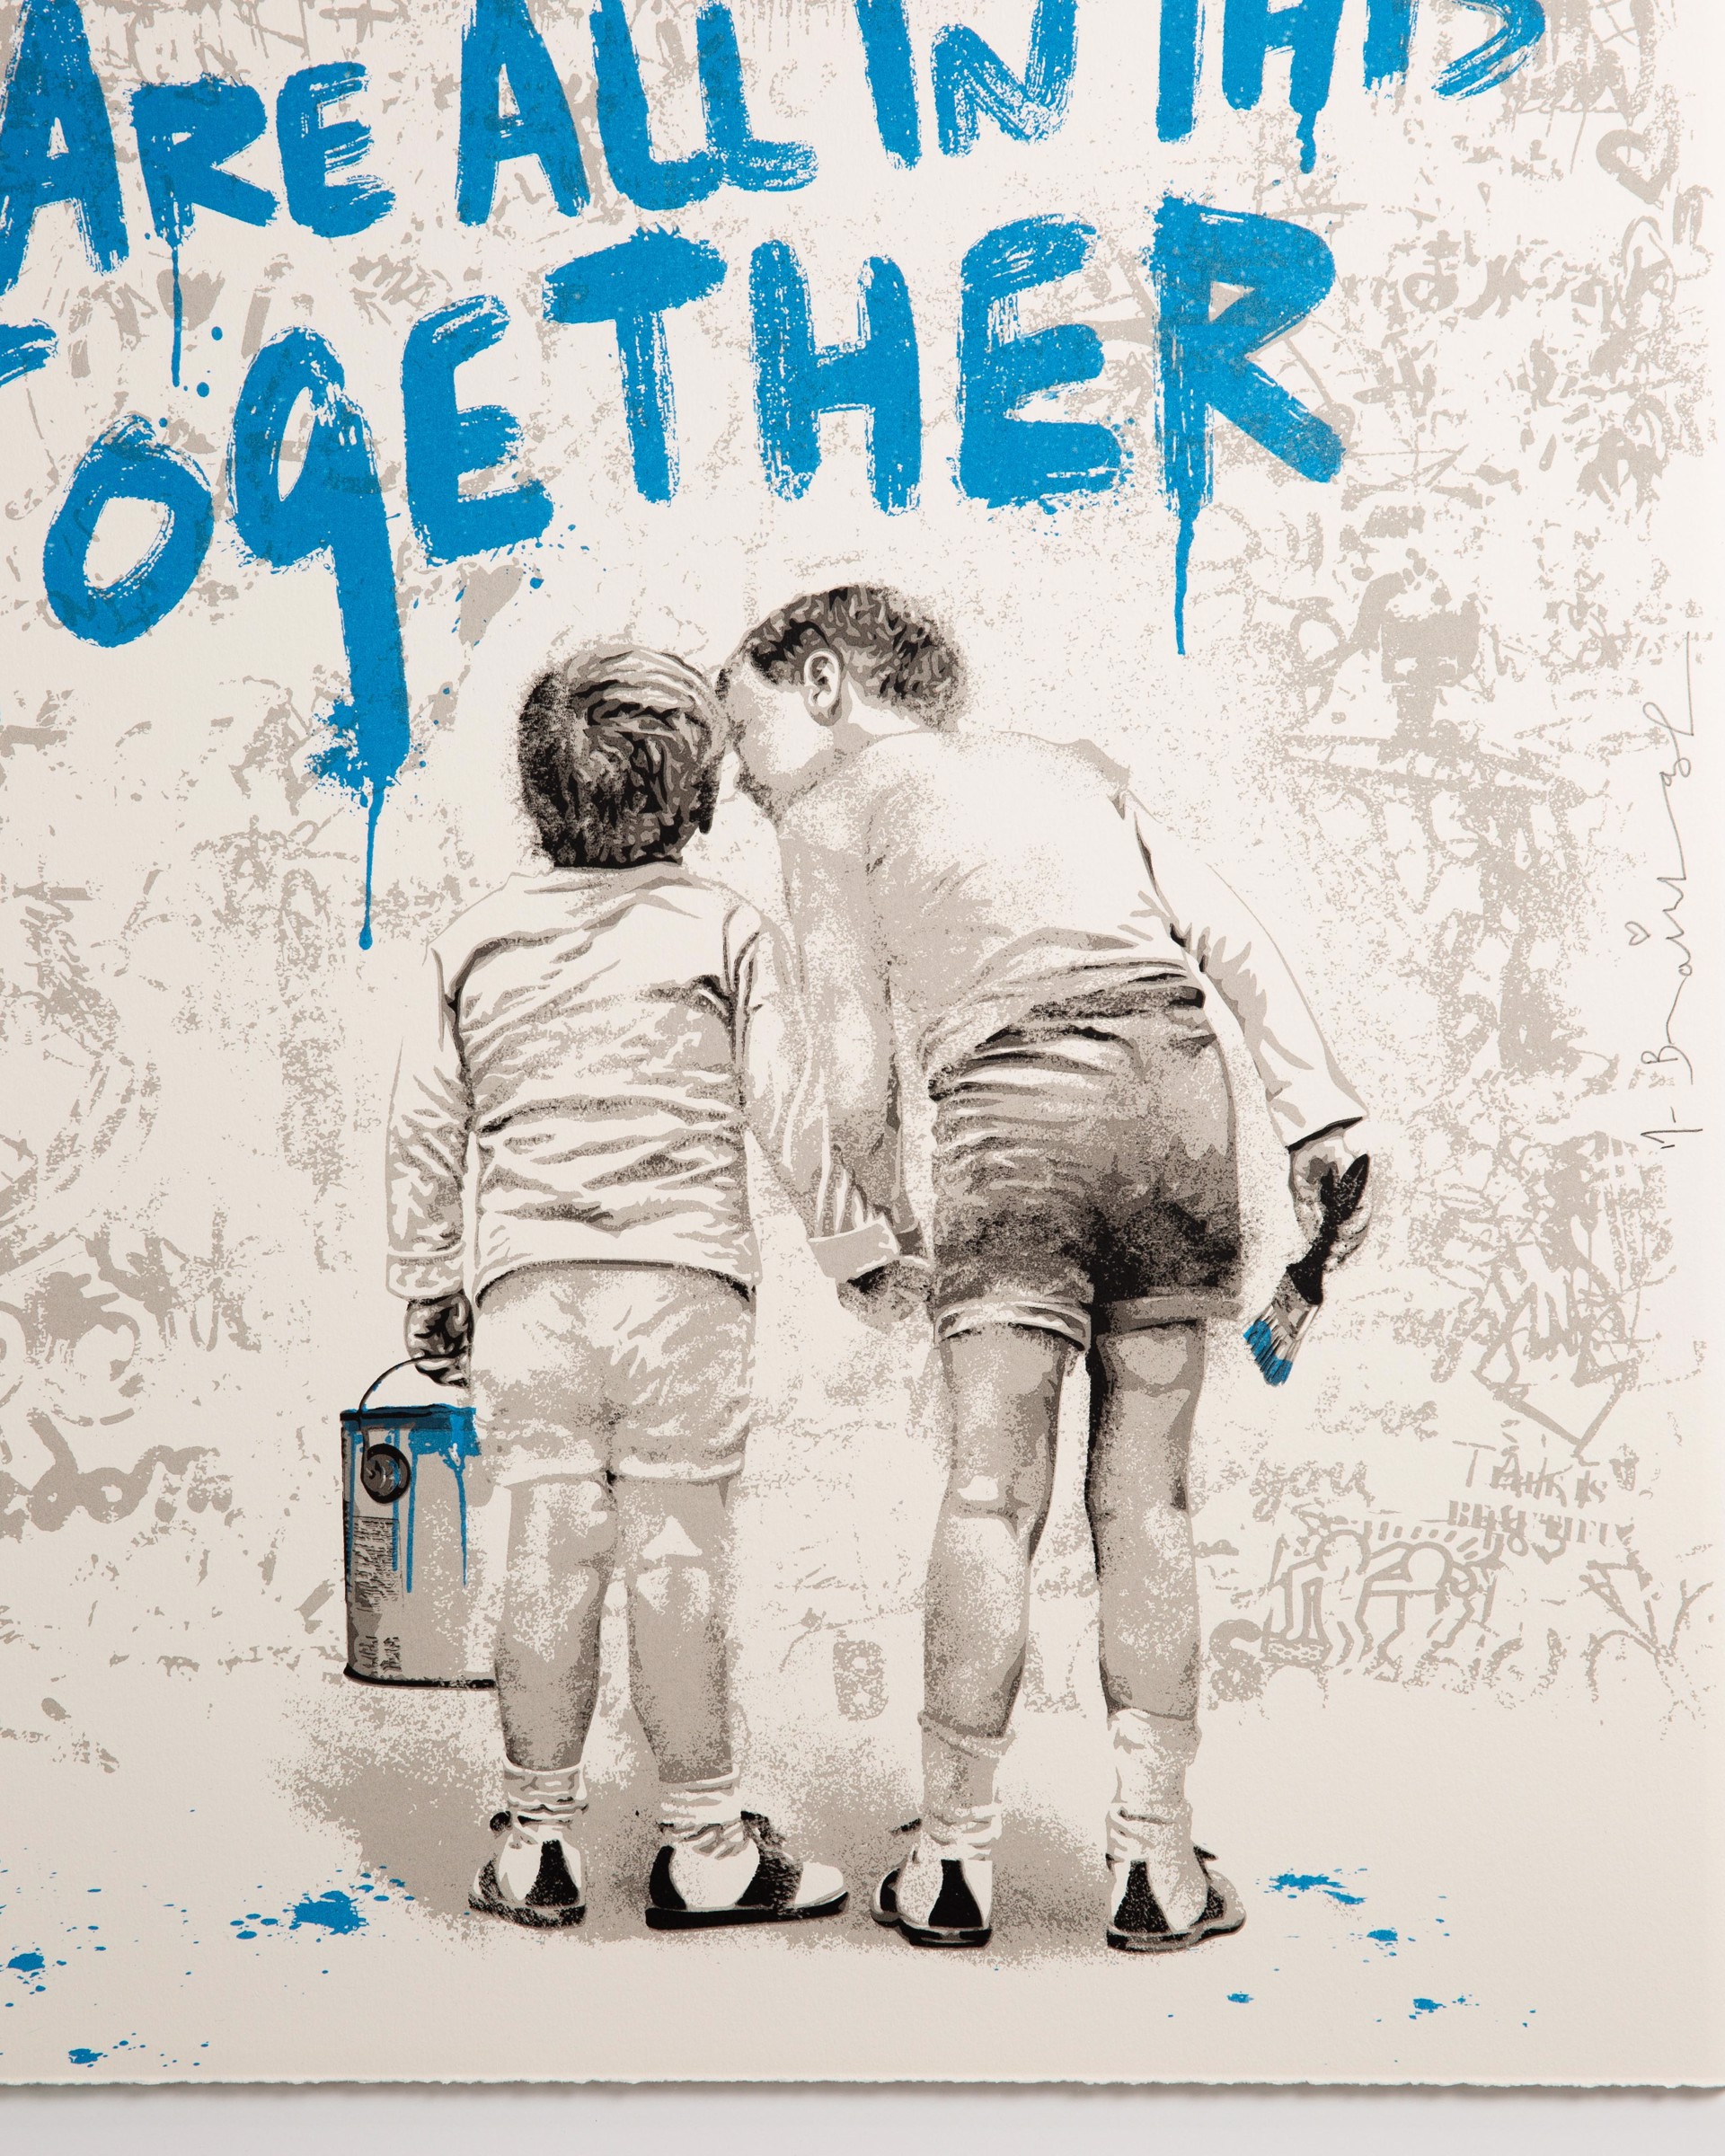 We are all in this together (blue) by Mr.Brainwash